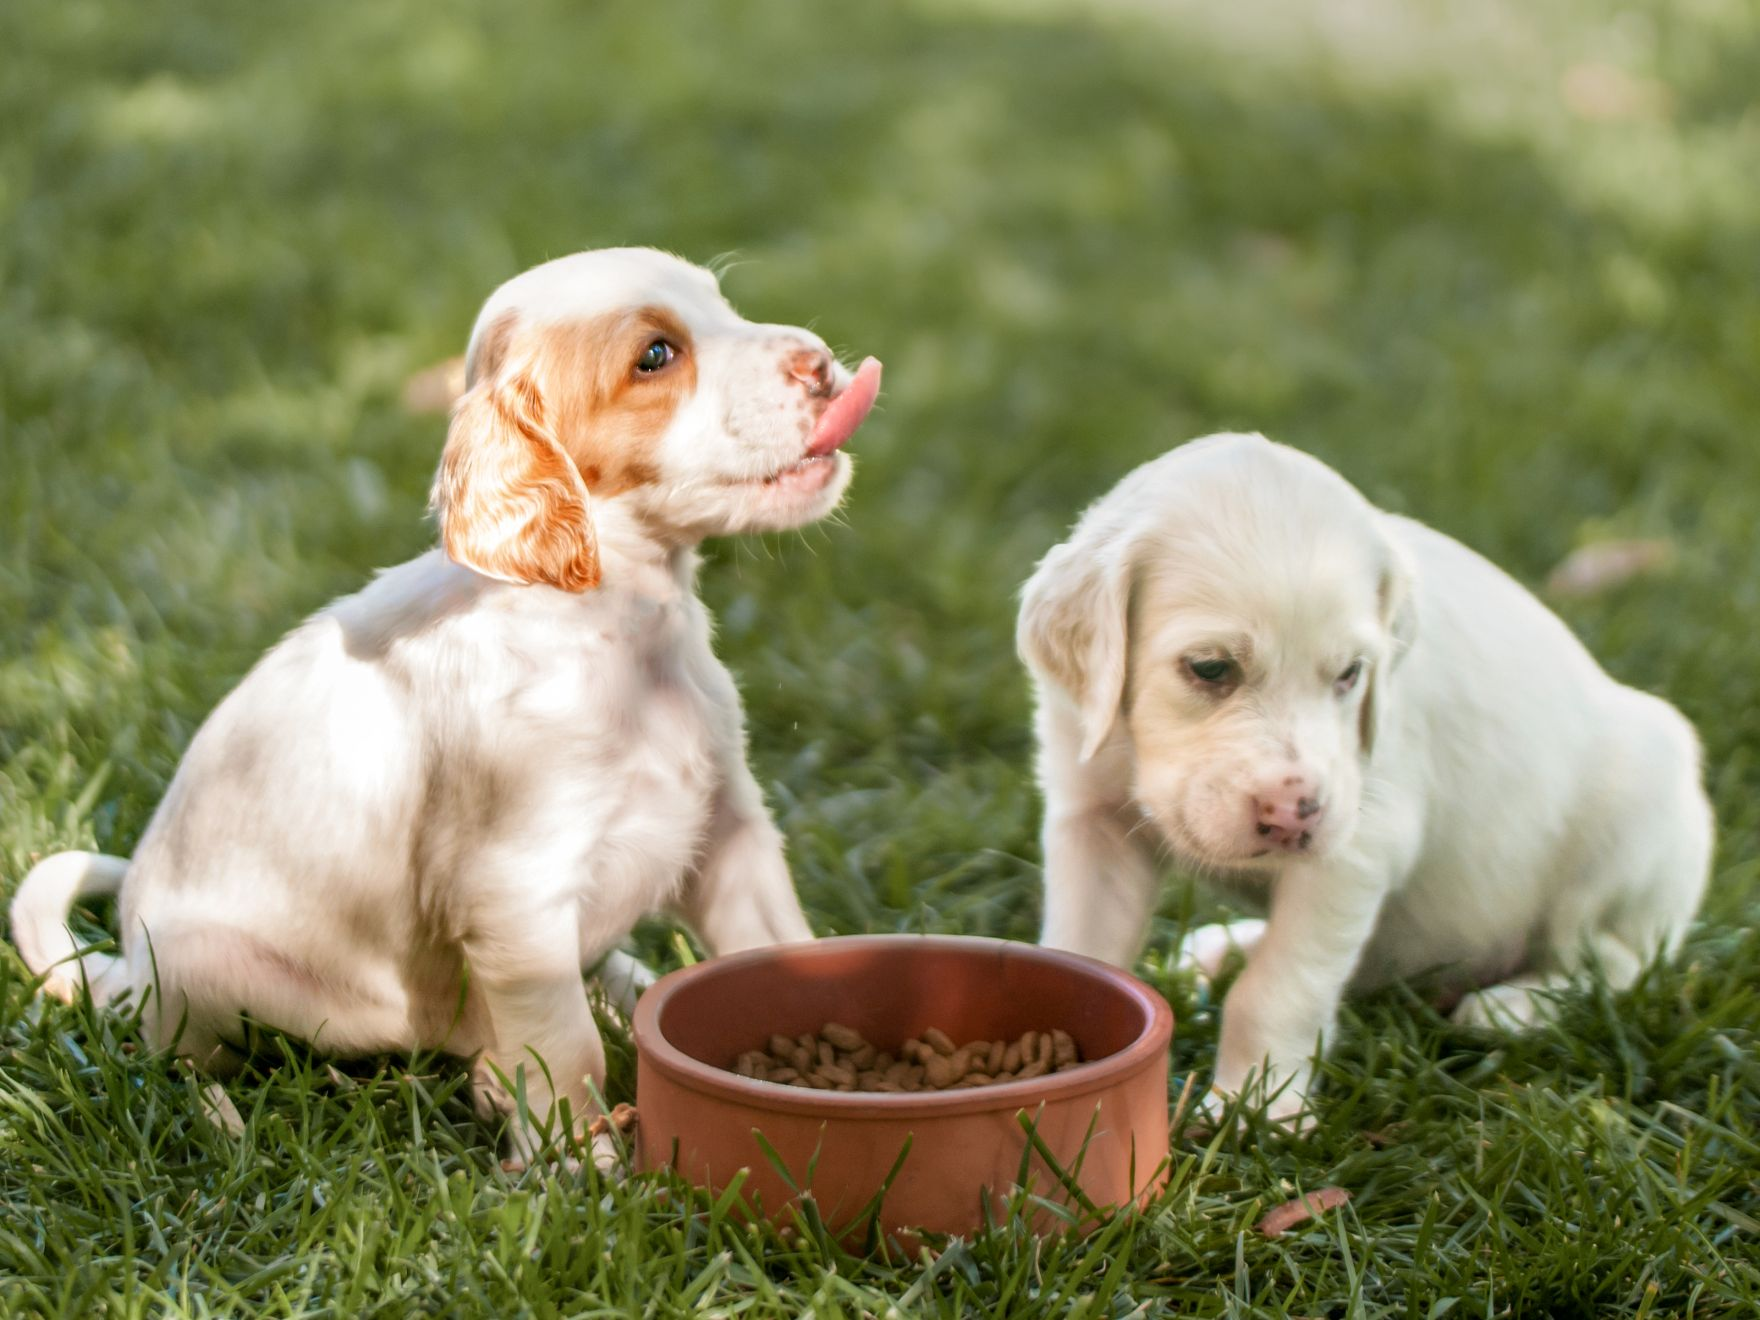 Two puppies sitting outdoors eating from a feeding bowl